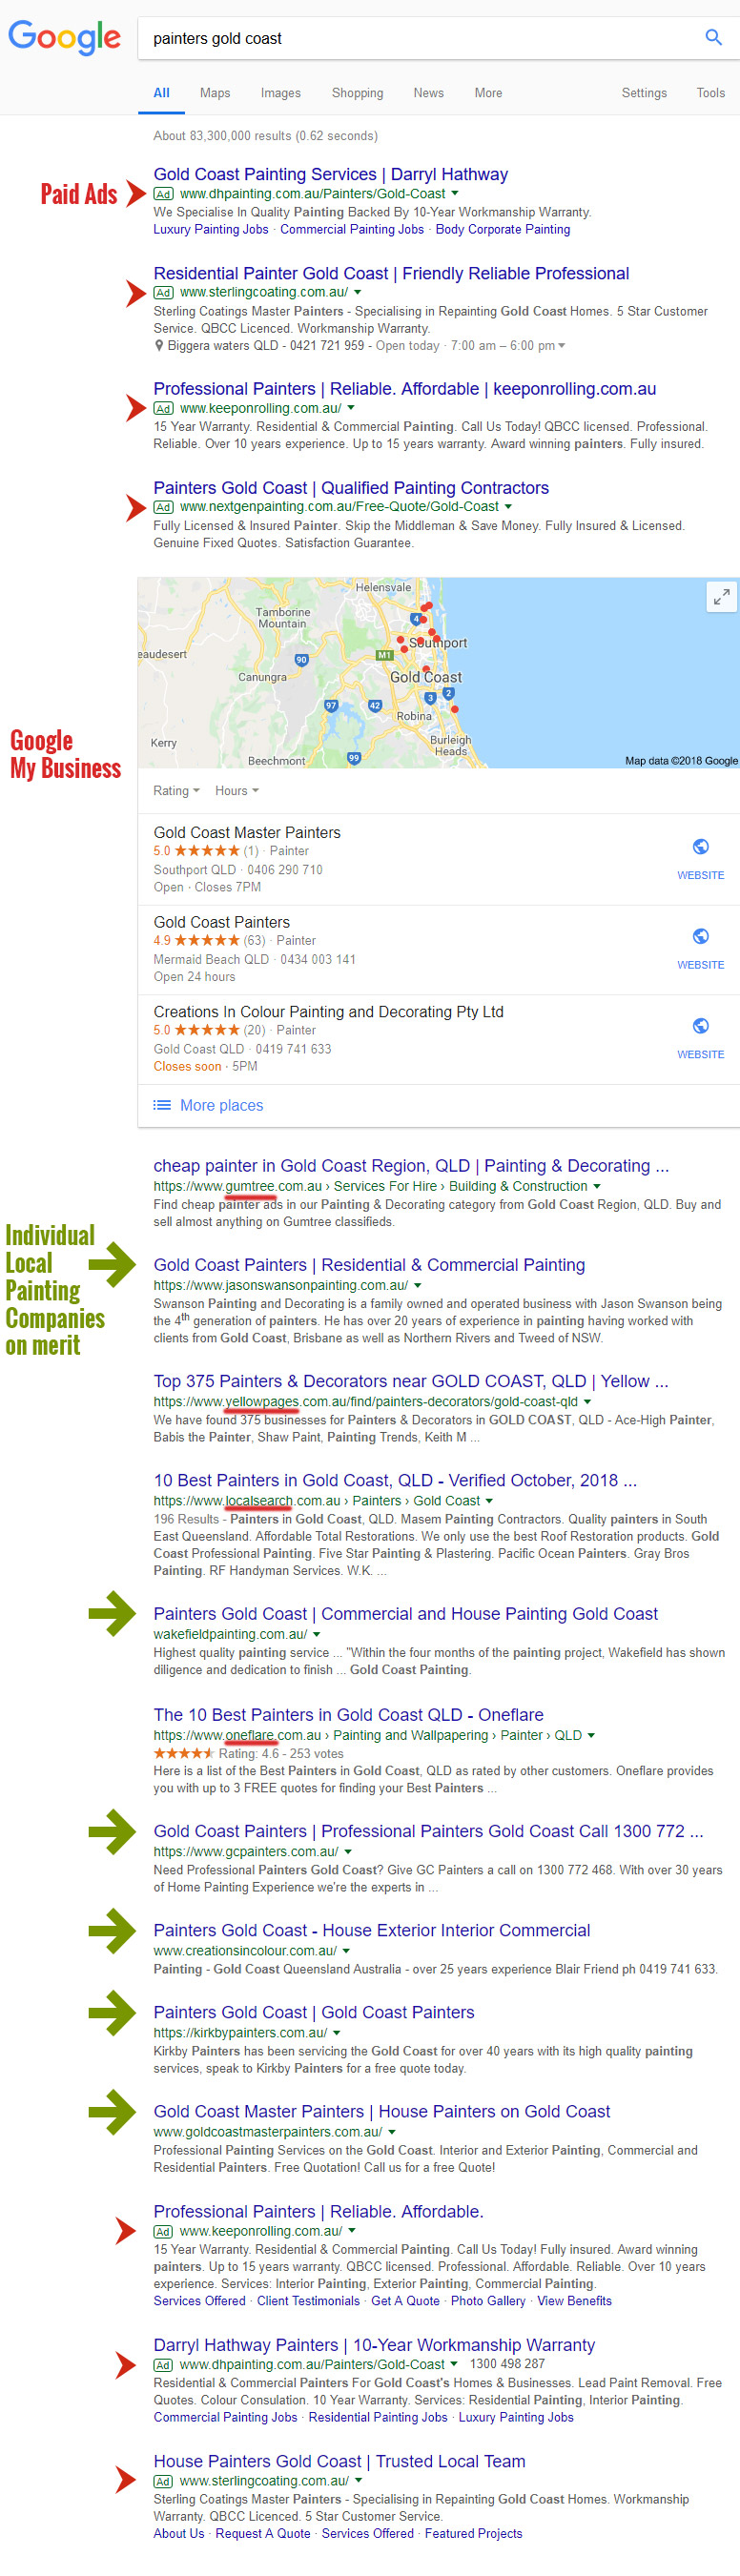 Anatomy of a Google Local Search